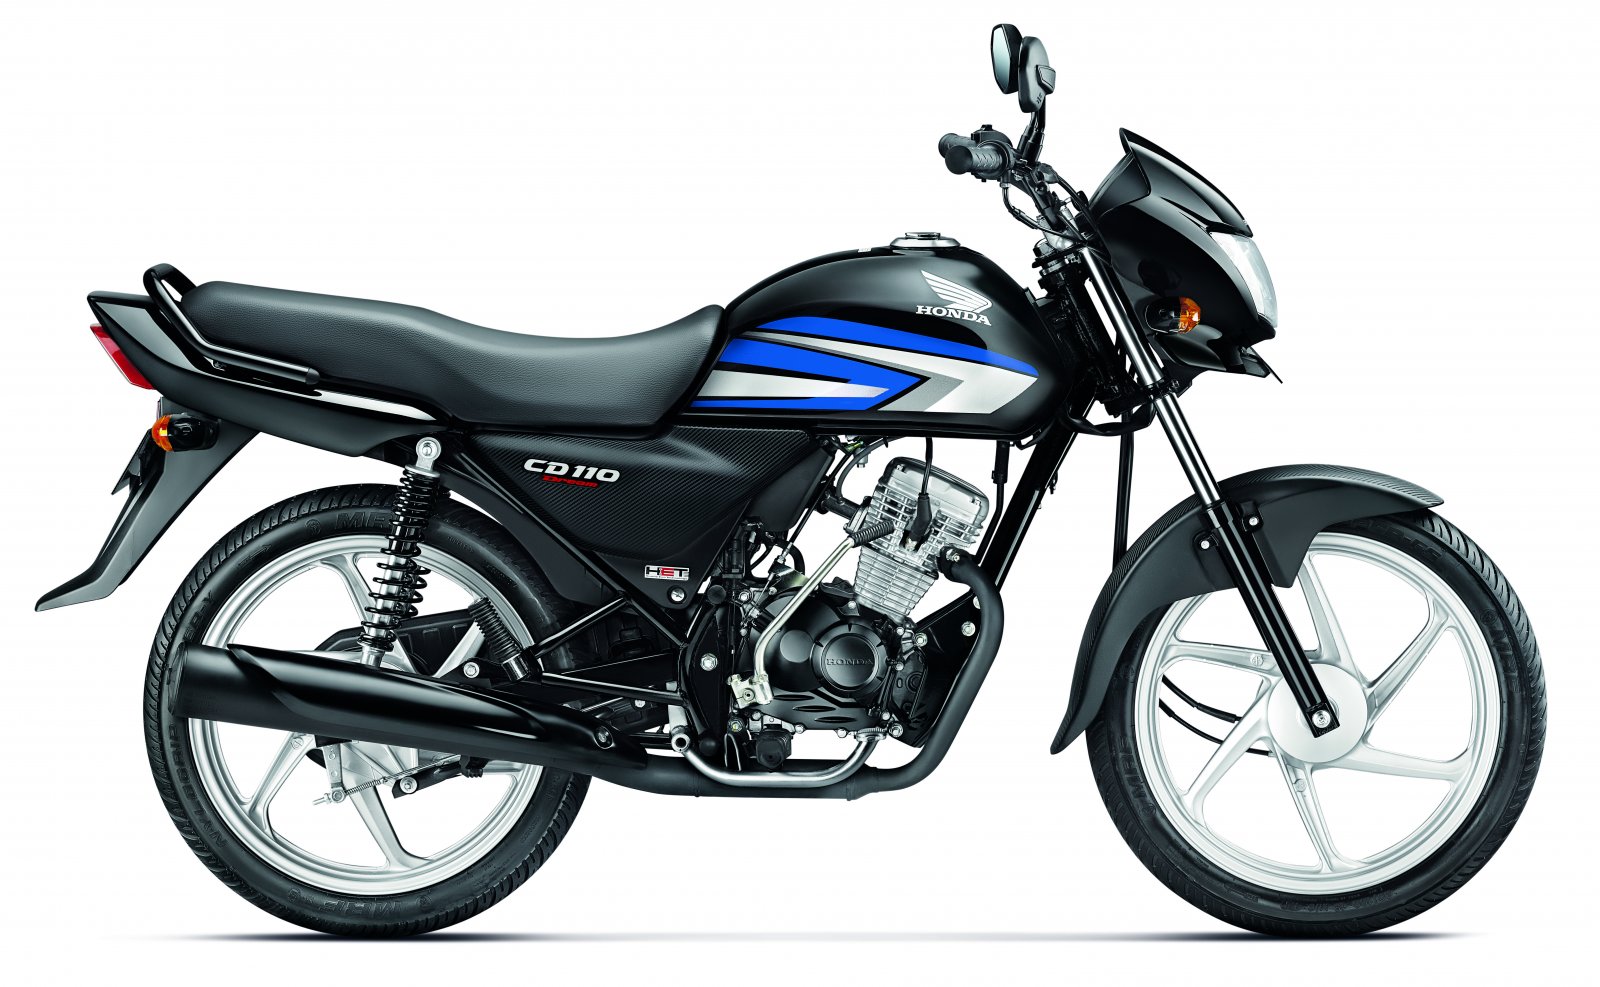 honda-s-cd-110-dream-launched-in-new-deluxe-variant-with-self-start